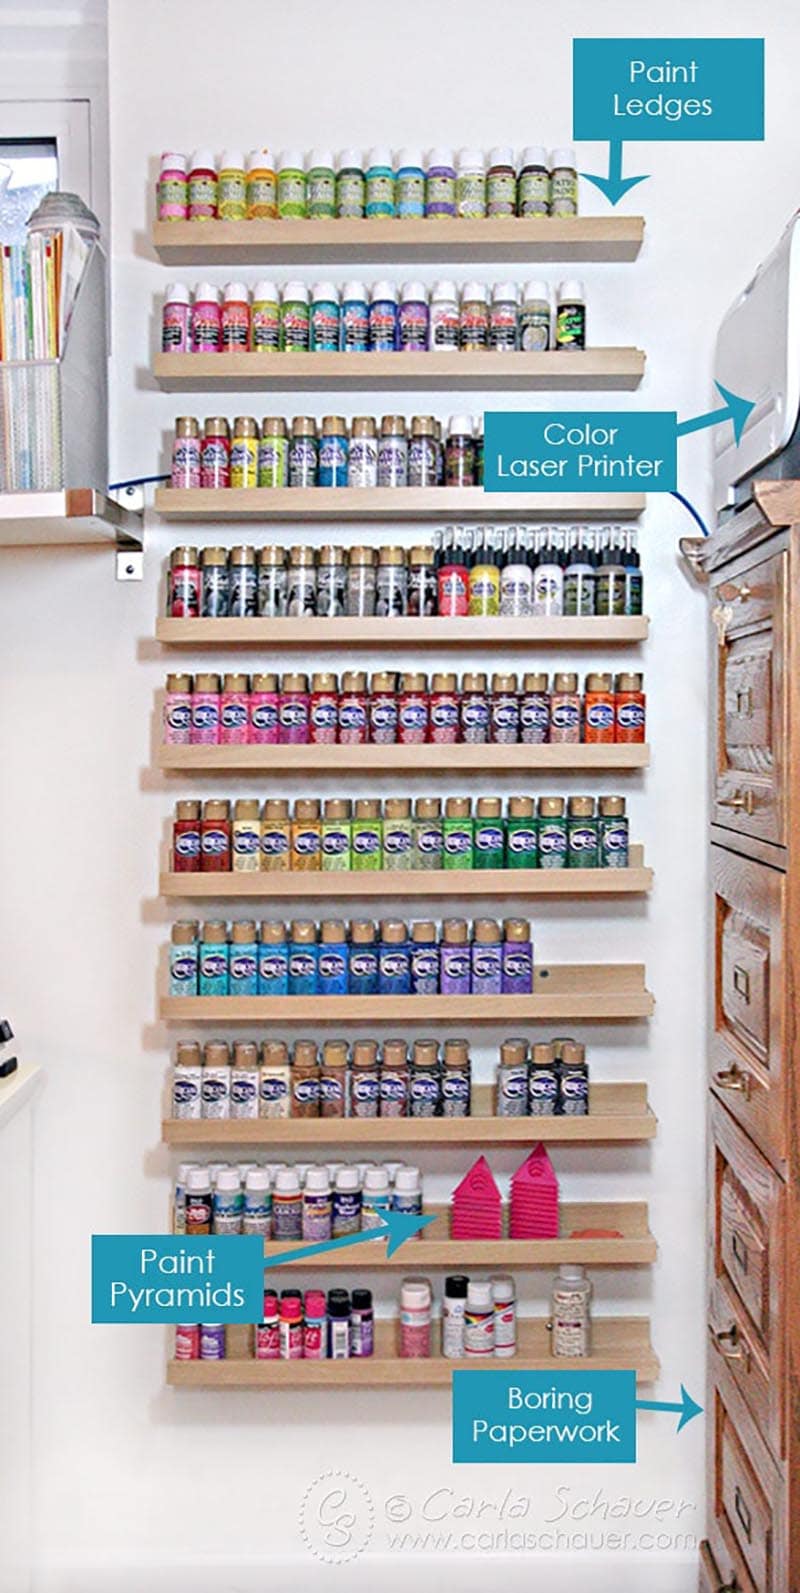 These Fun and Fabulous Craft Room Organization Hacks & Ideas are going to totally inspire you to get in your Craft Room and give it a little flair!